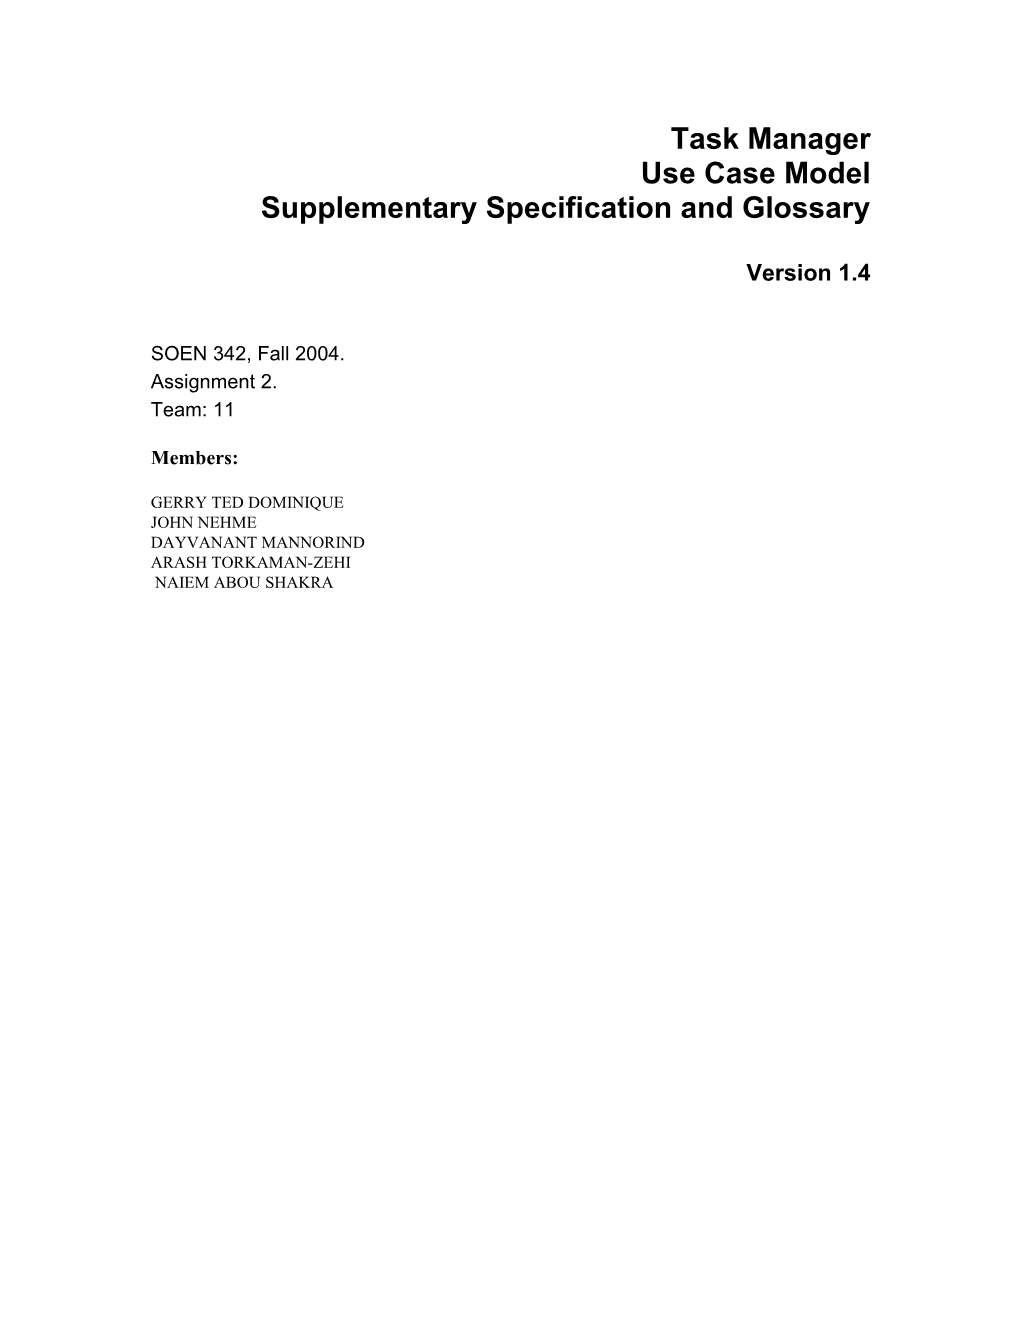 Supplementary Specification and Glossary